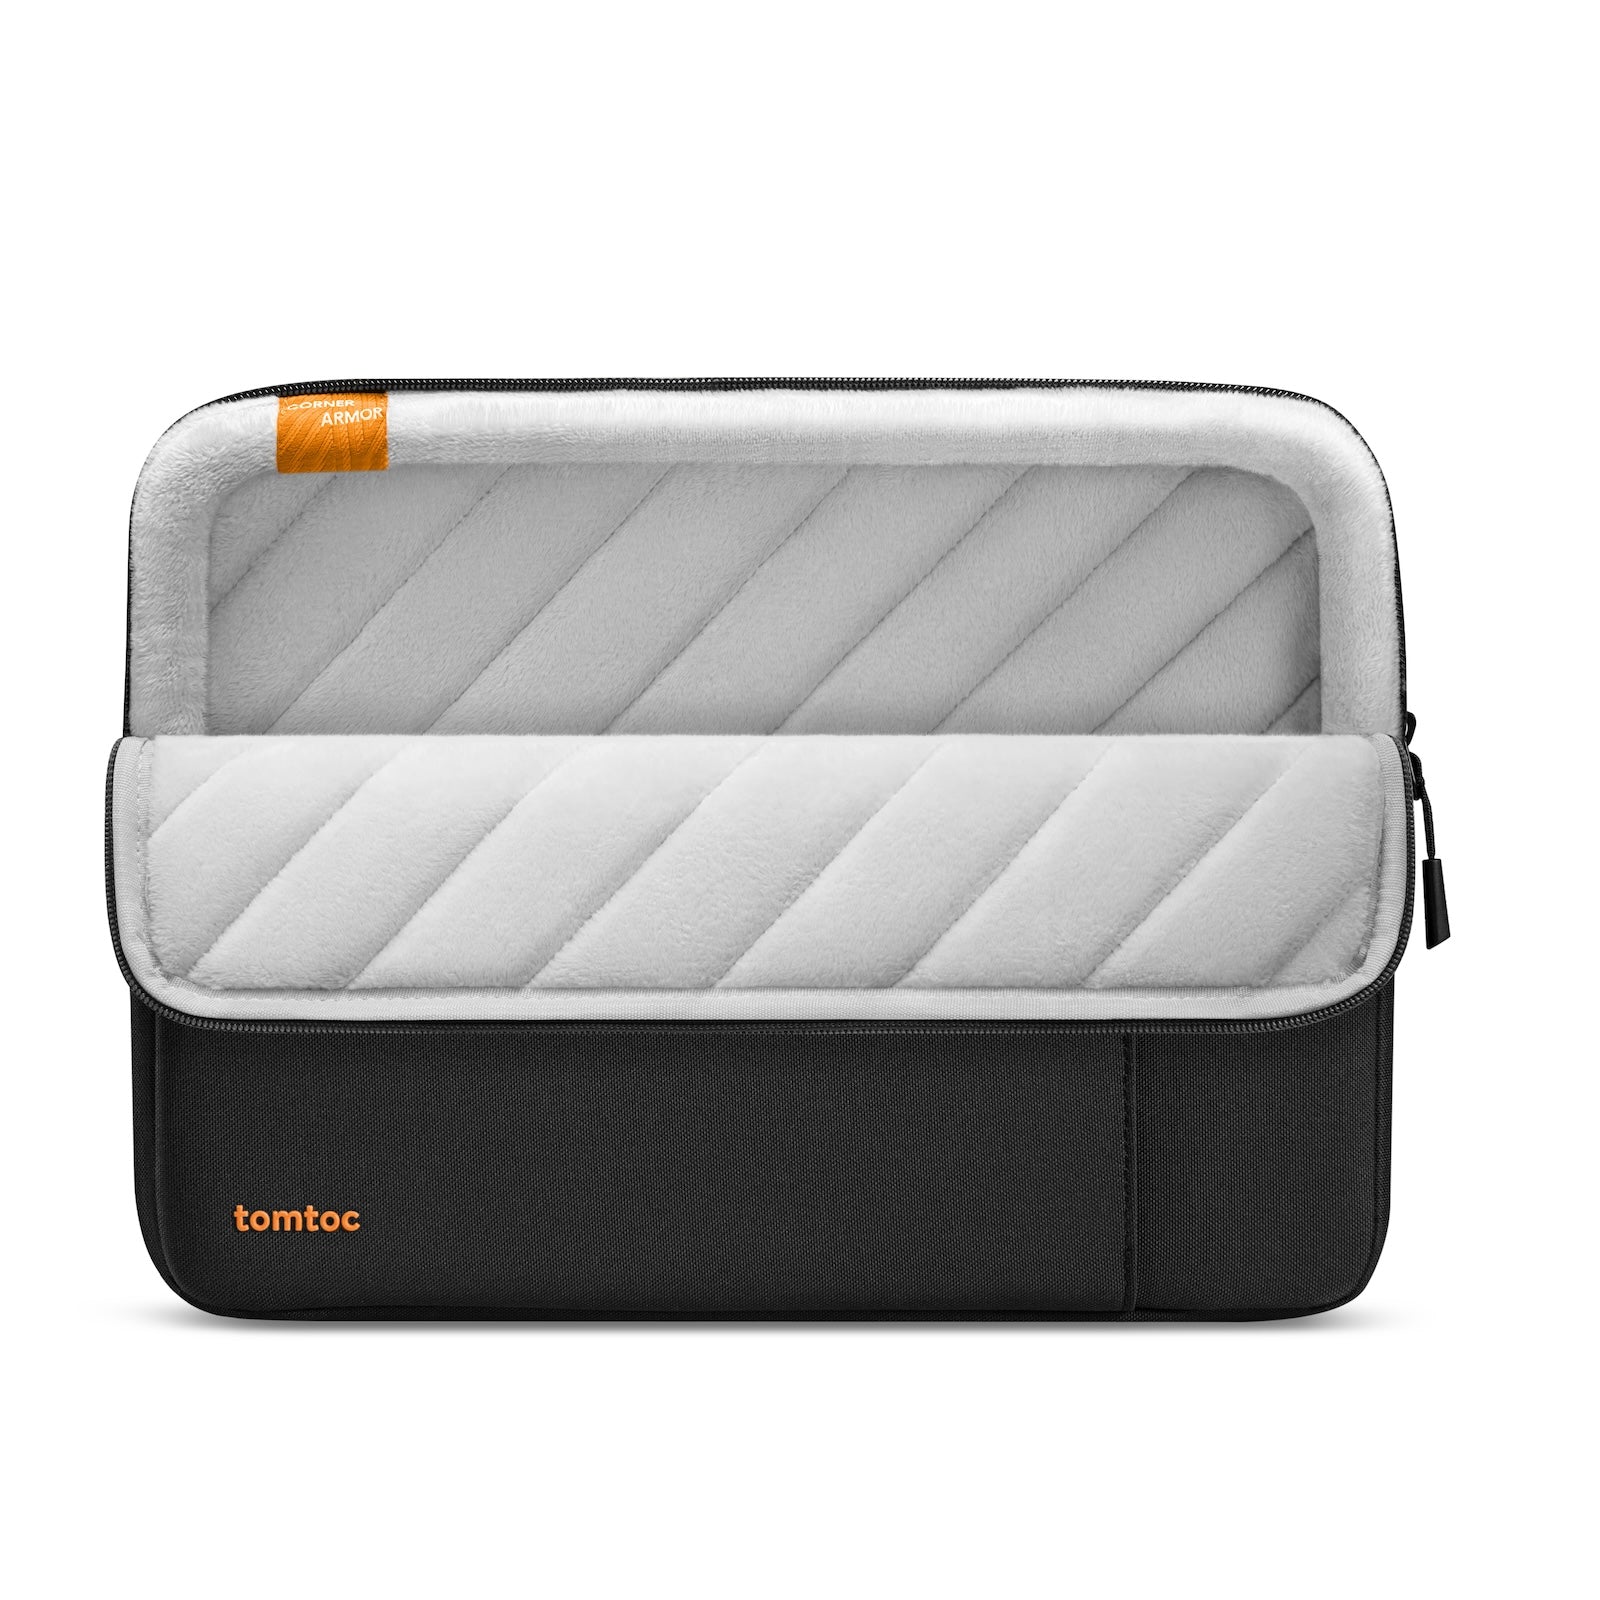 tomtoc Defender A13 Laptop Sleeve - 14inch